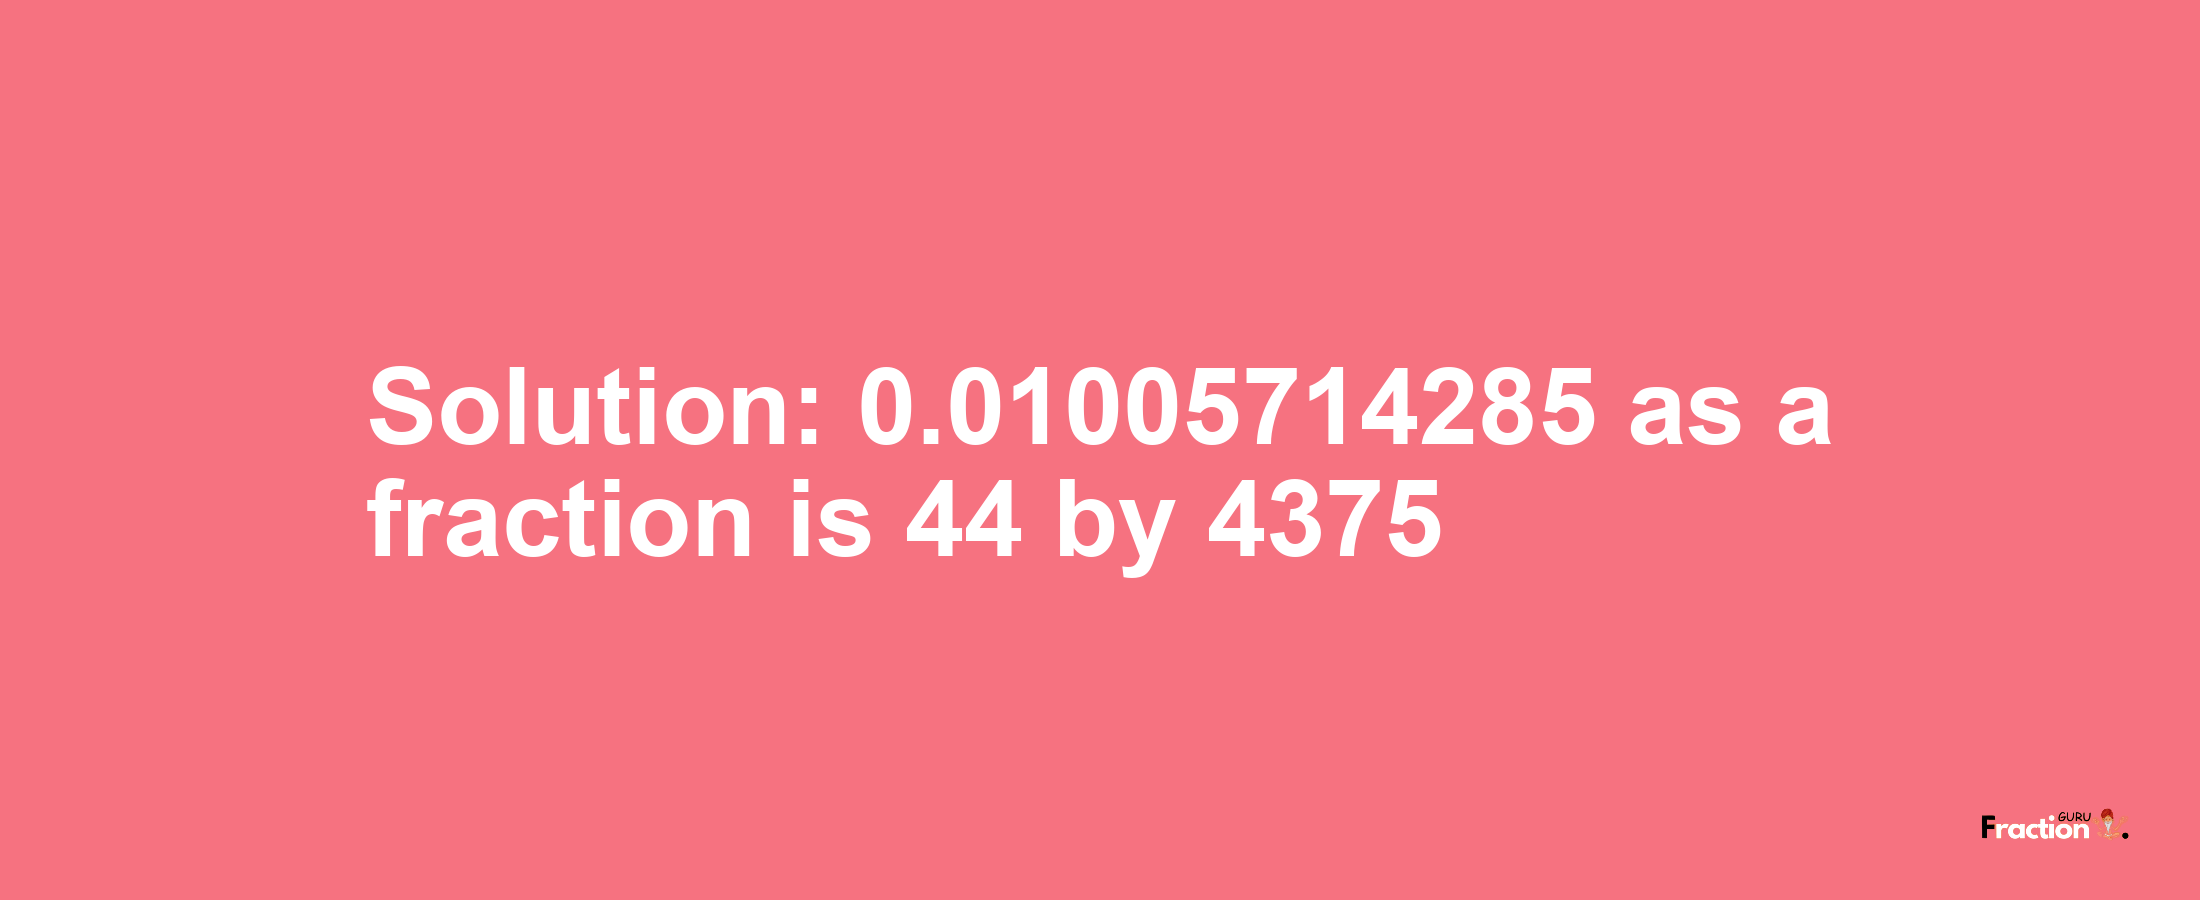 Solution:0.01005714285 as a fraction is 44/4375